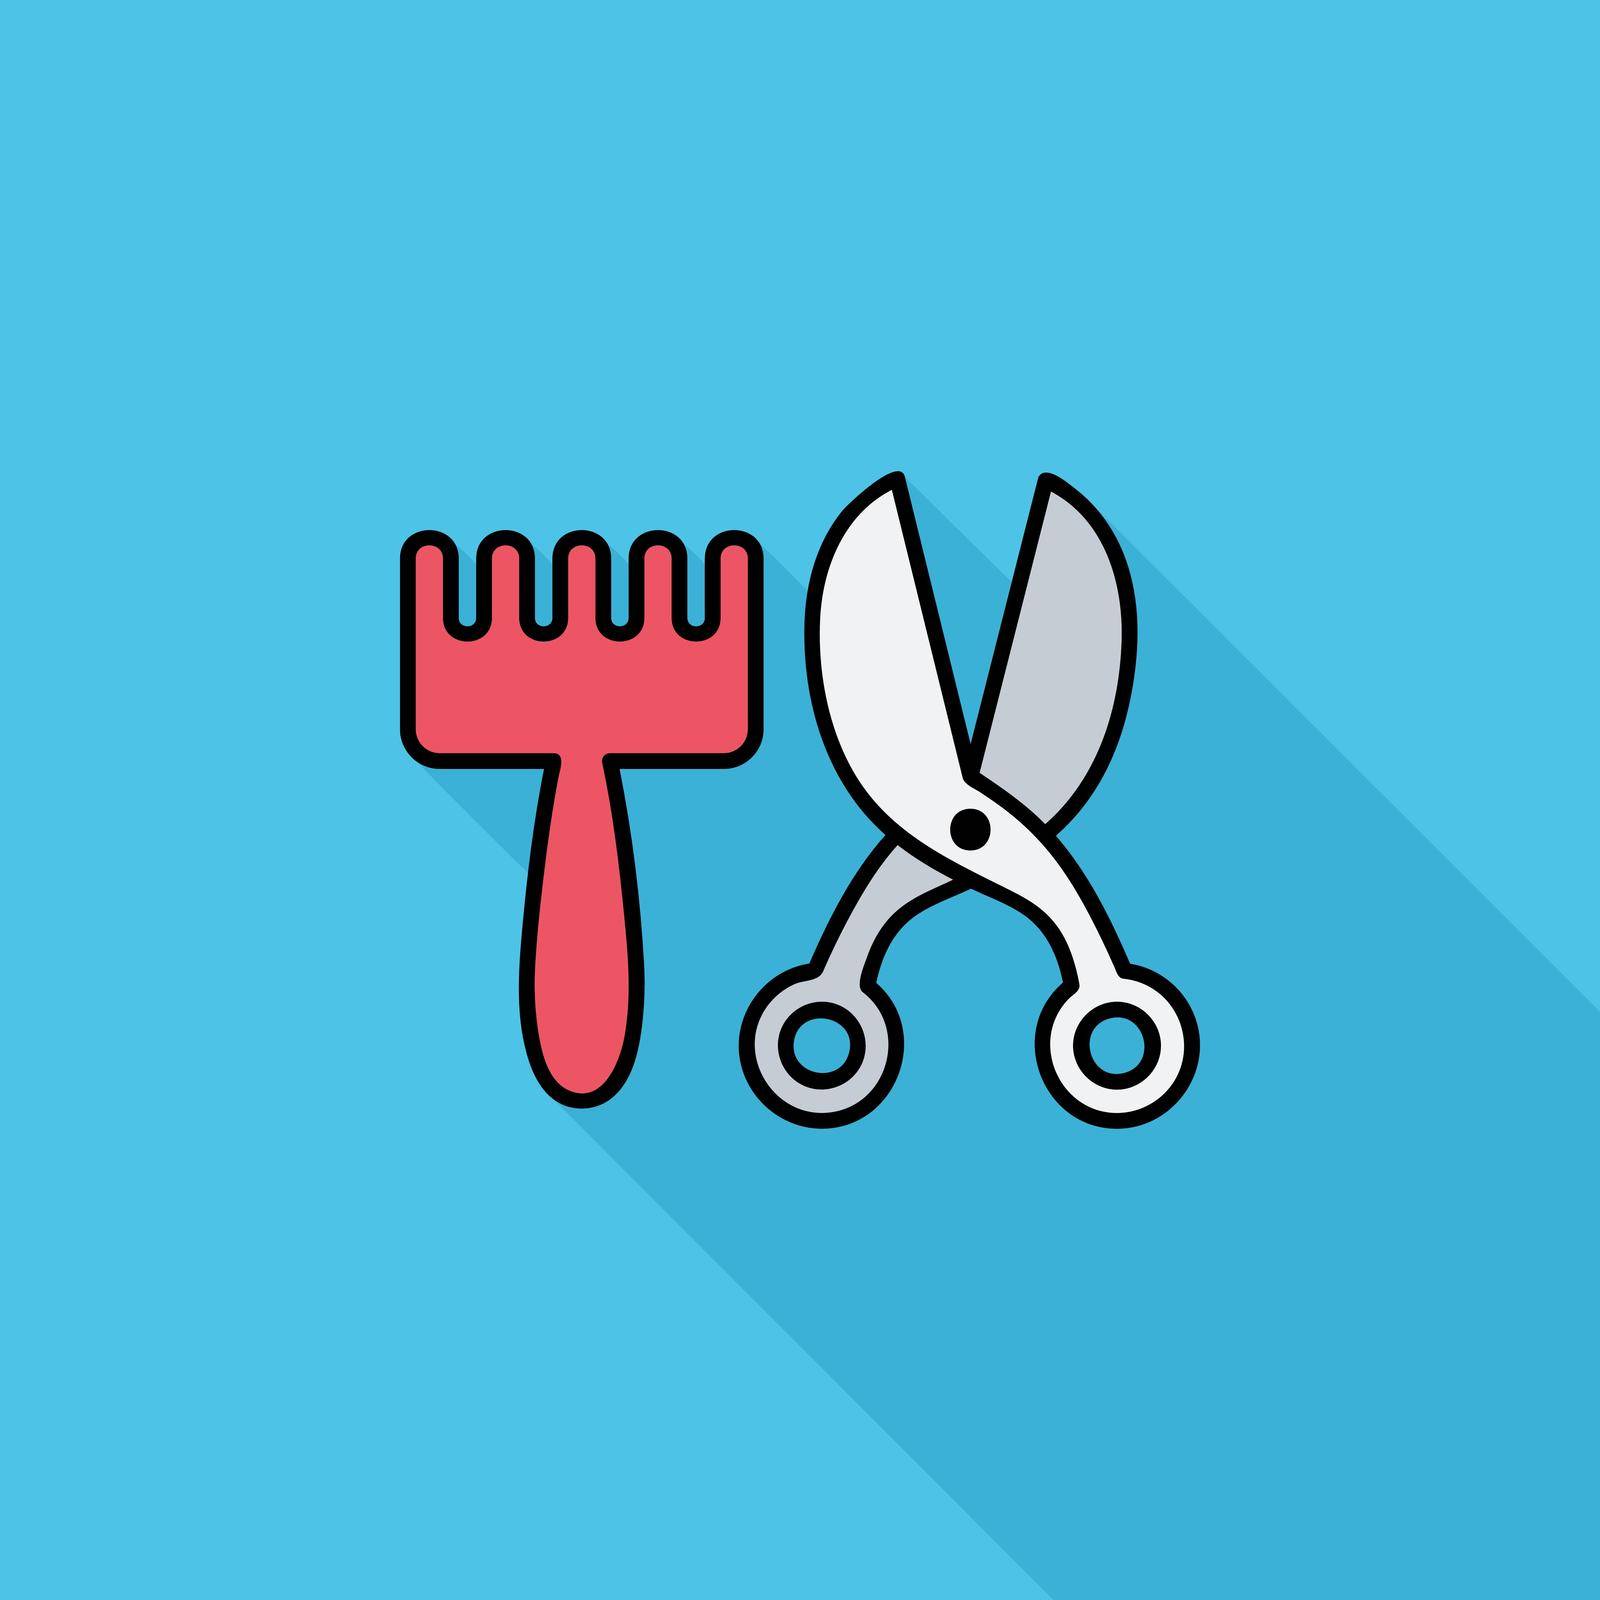 Scissors and comb icon. Flat vector related icon with long shadow for web and mobile applications. It can be used as - logo, pictogram, icon, infographic element. Vector Illustration.